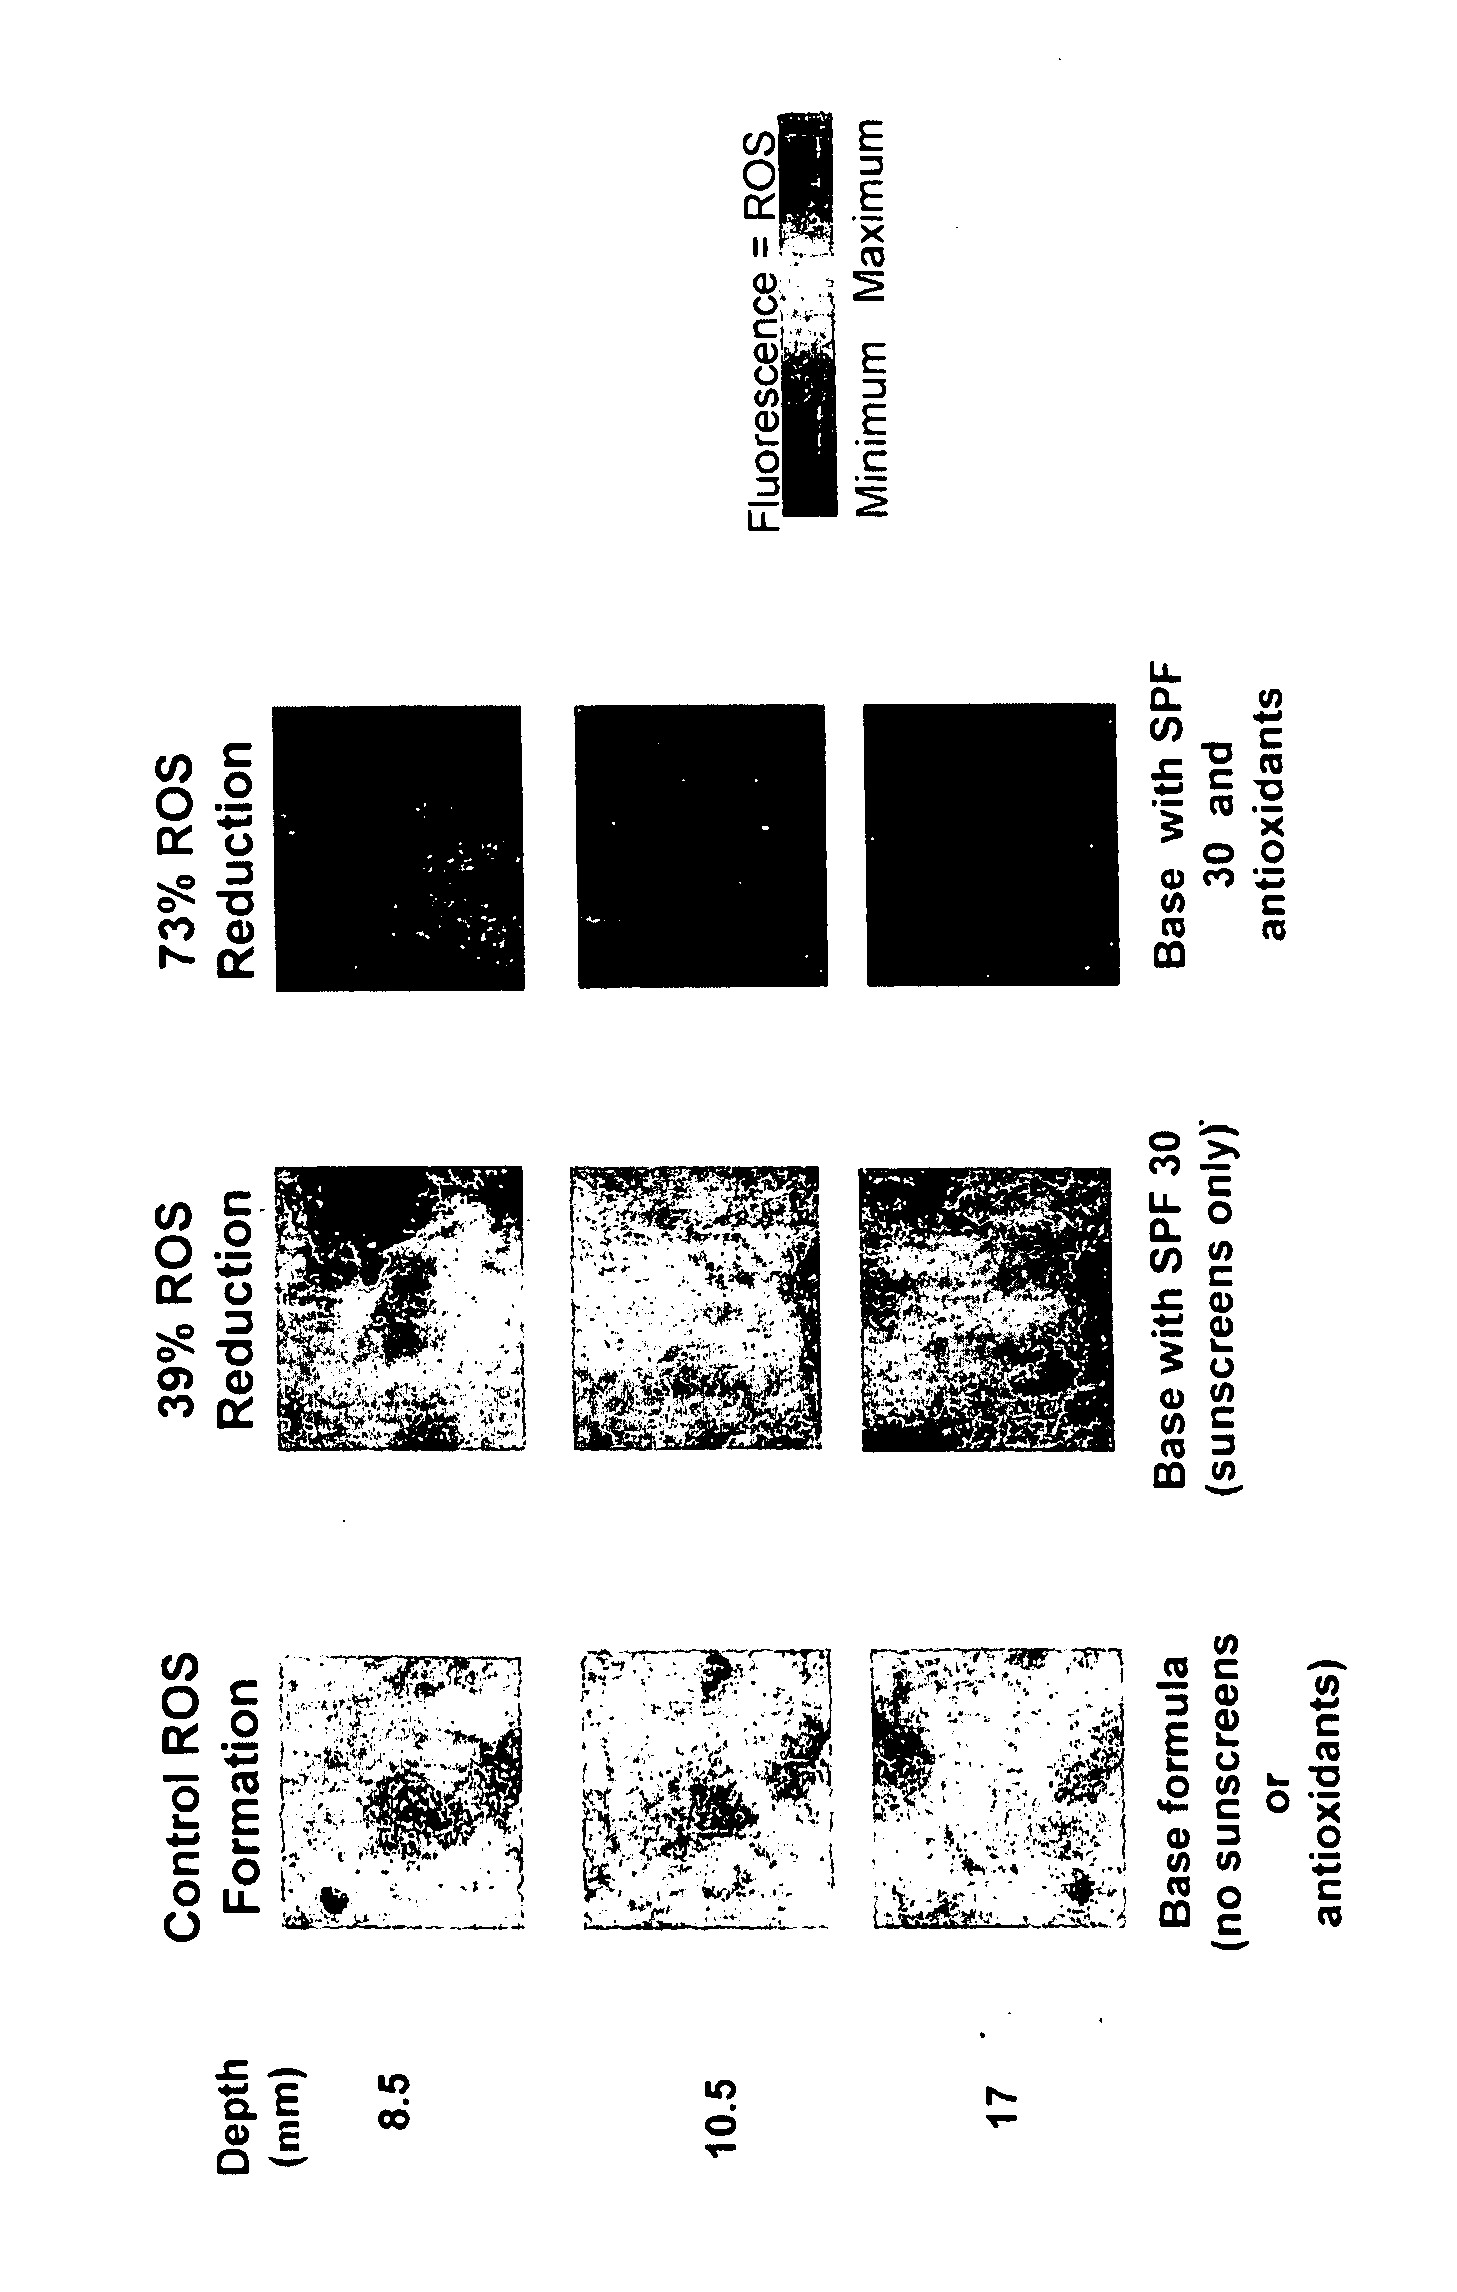 Method of selecting antioxidants for use in topically applied compositions